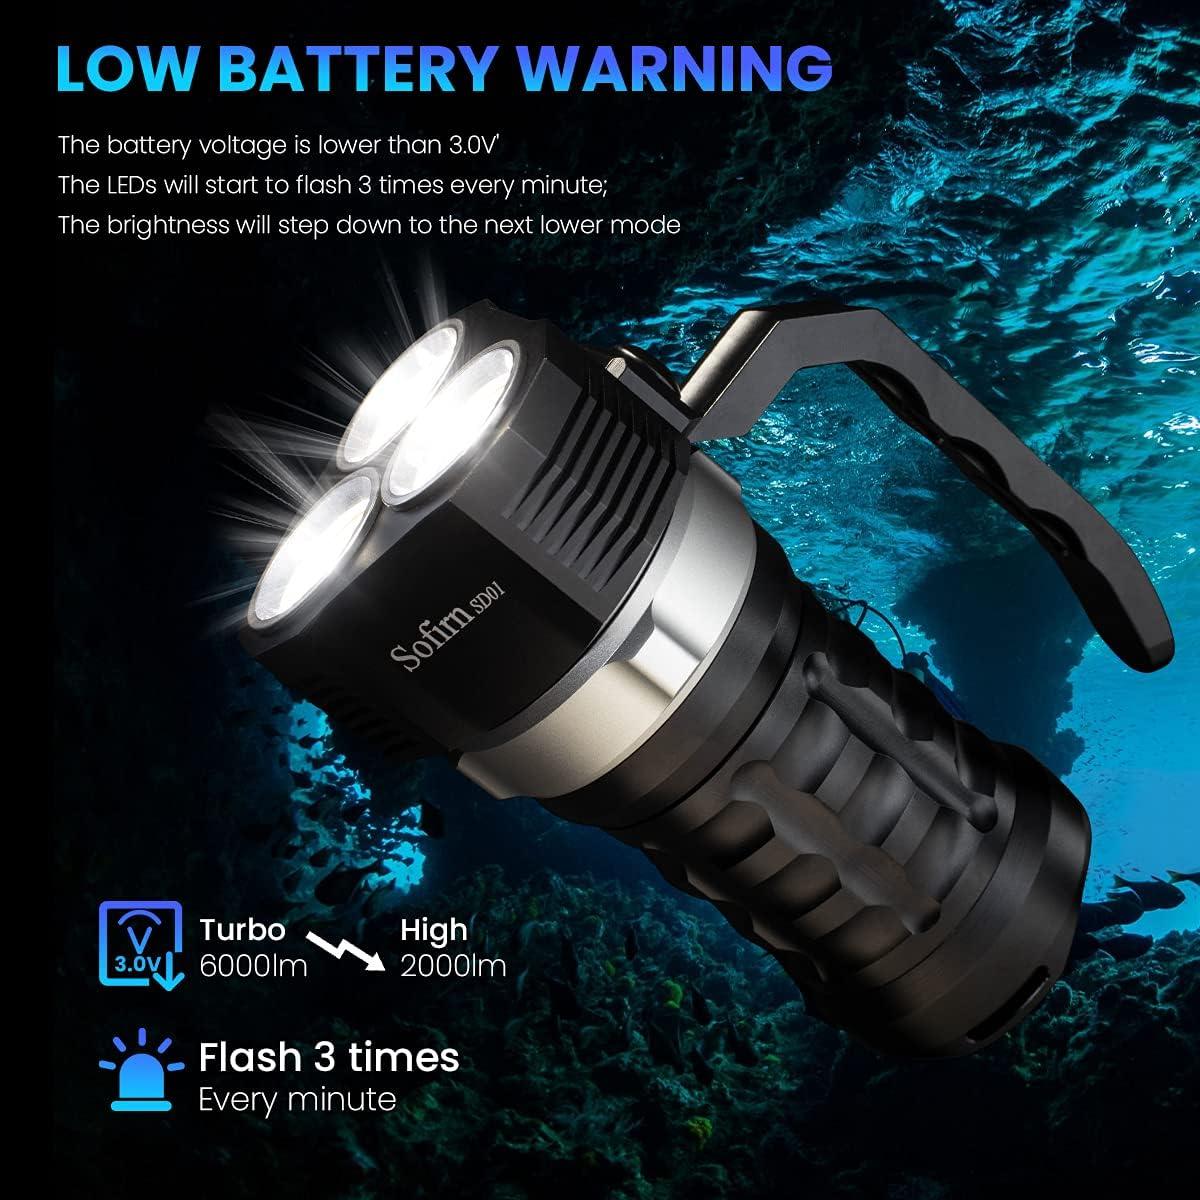 sofirn 6000 Lumen LED Scuba Diving Flashlight, Super Bright 100m Underwater  and Powerful Waterproof Torch with Magnetic Control Switch, 4 Light Modes.  (SD01) SD01-6000LM